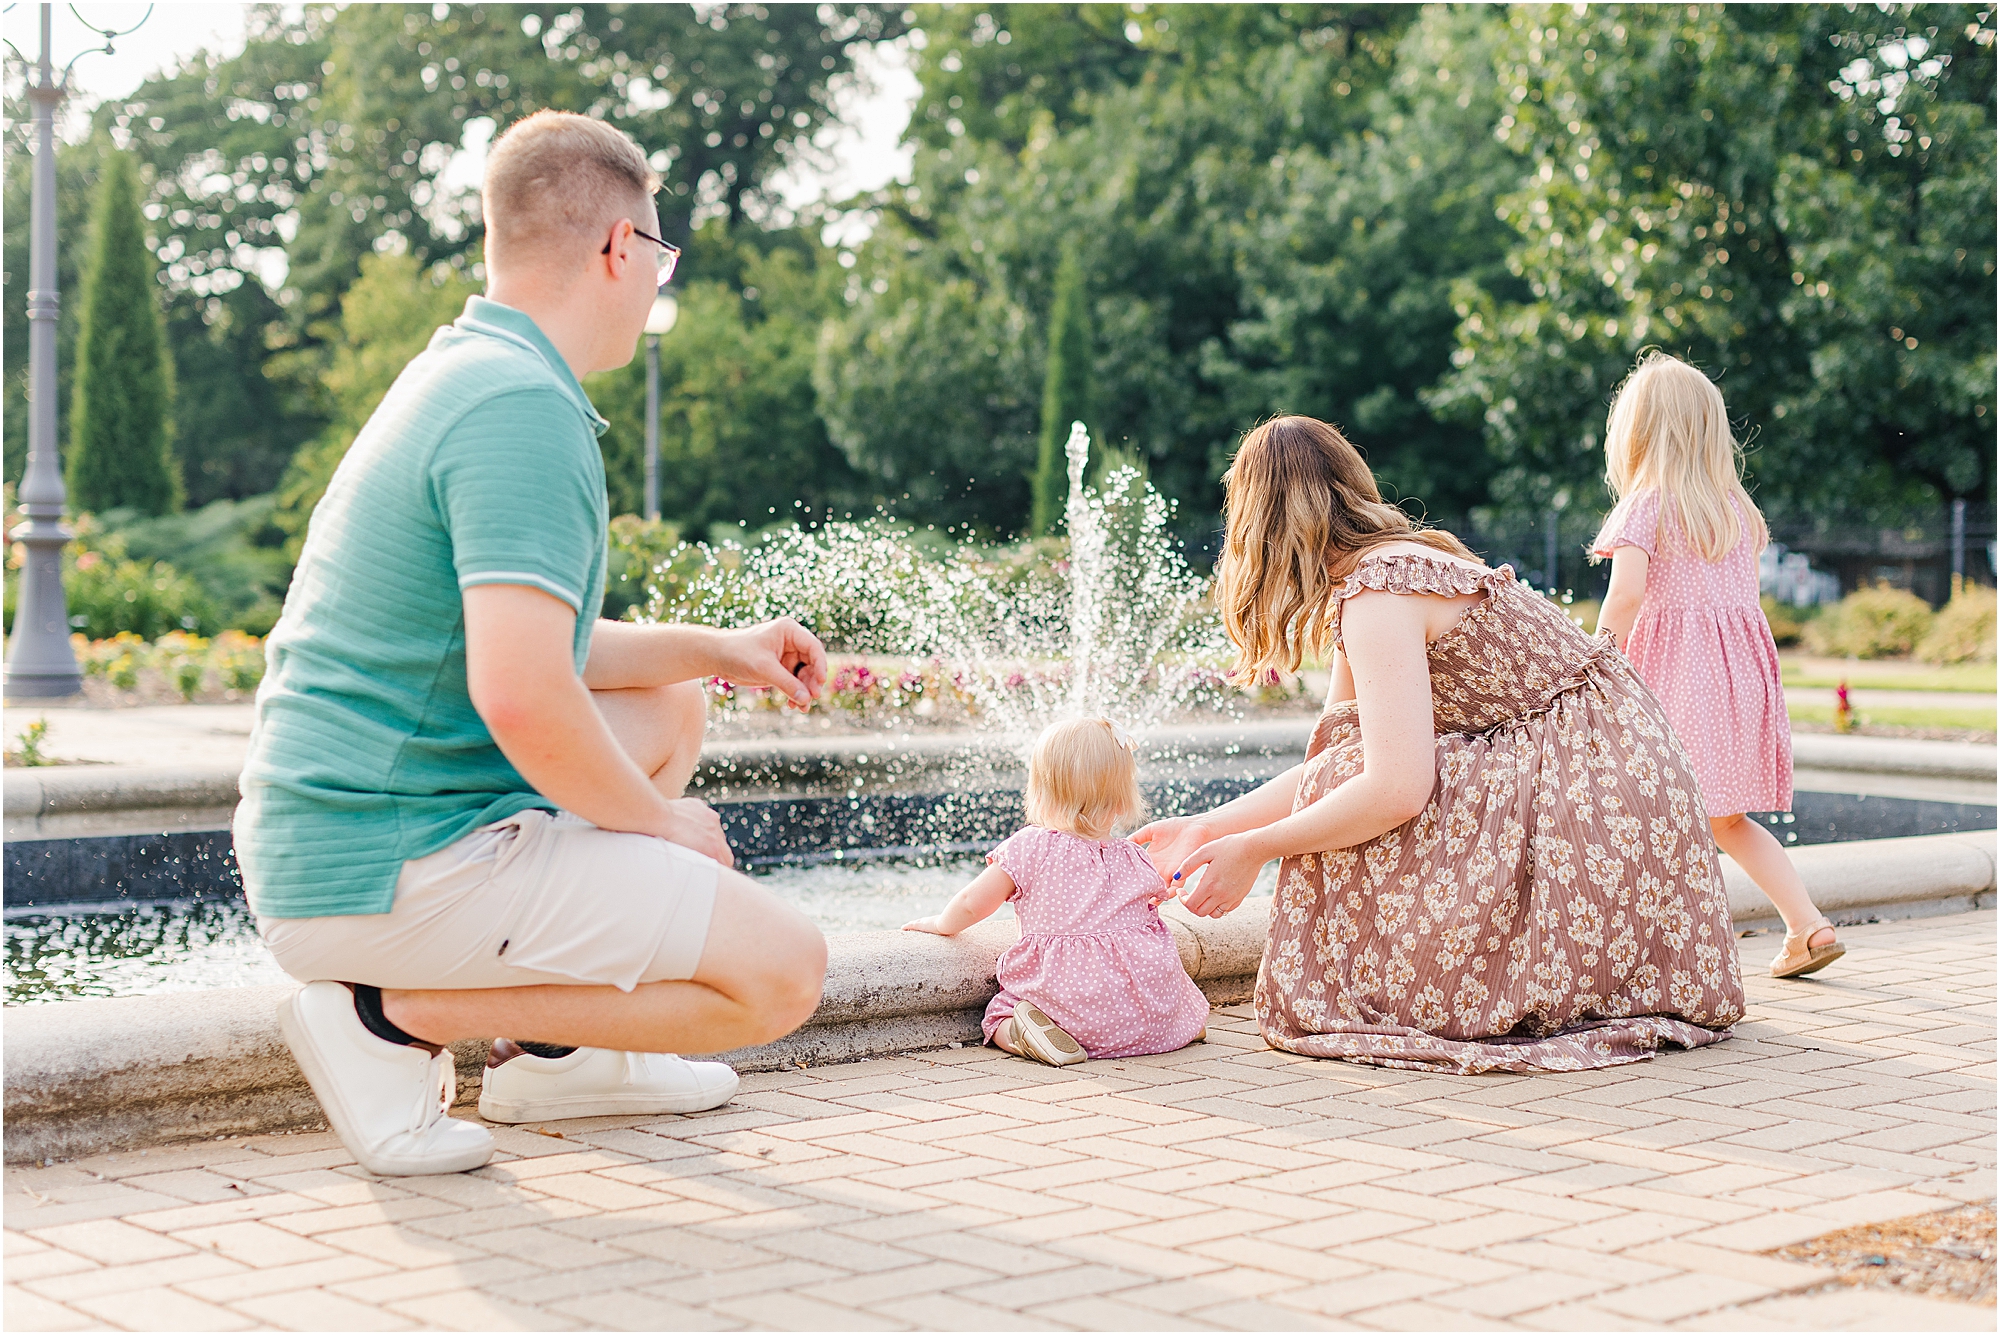 Family Watching the water fountain in the summer.